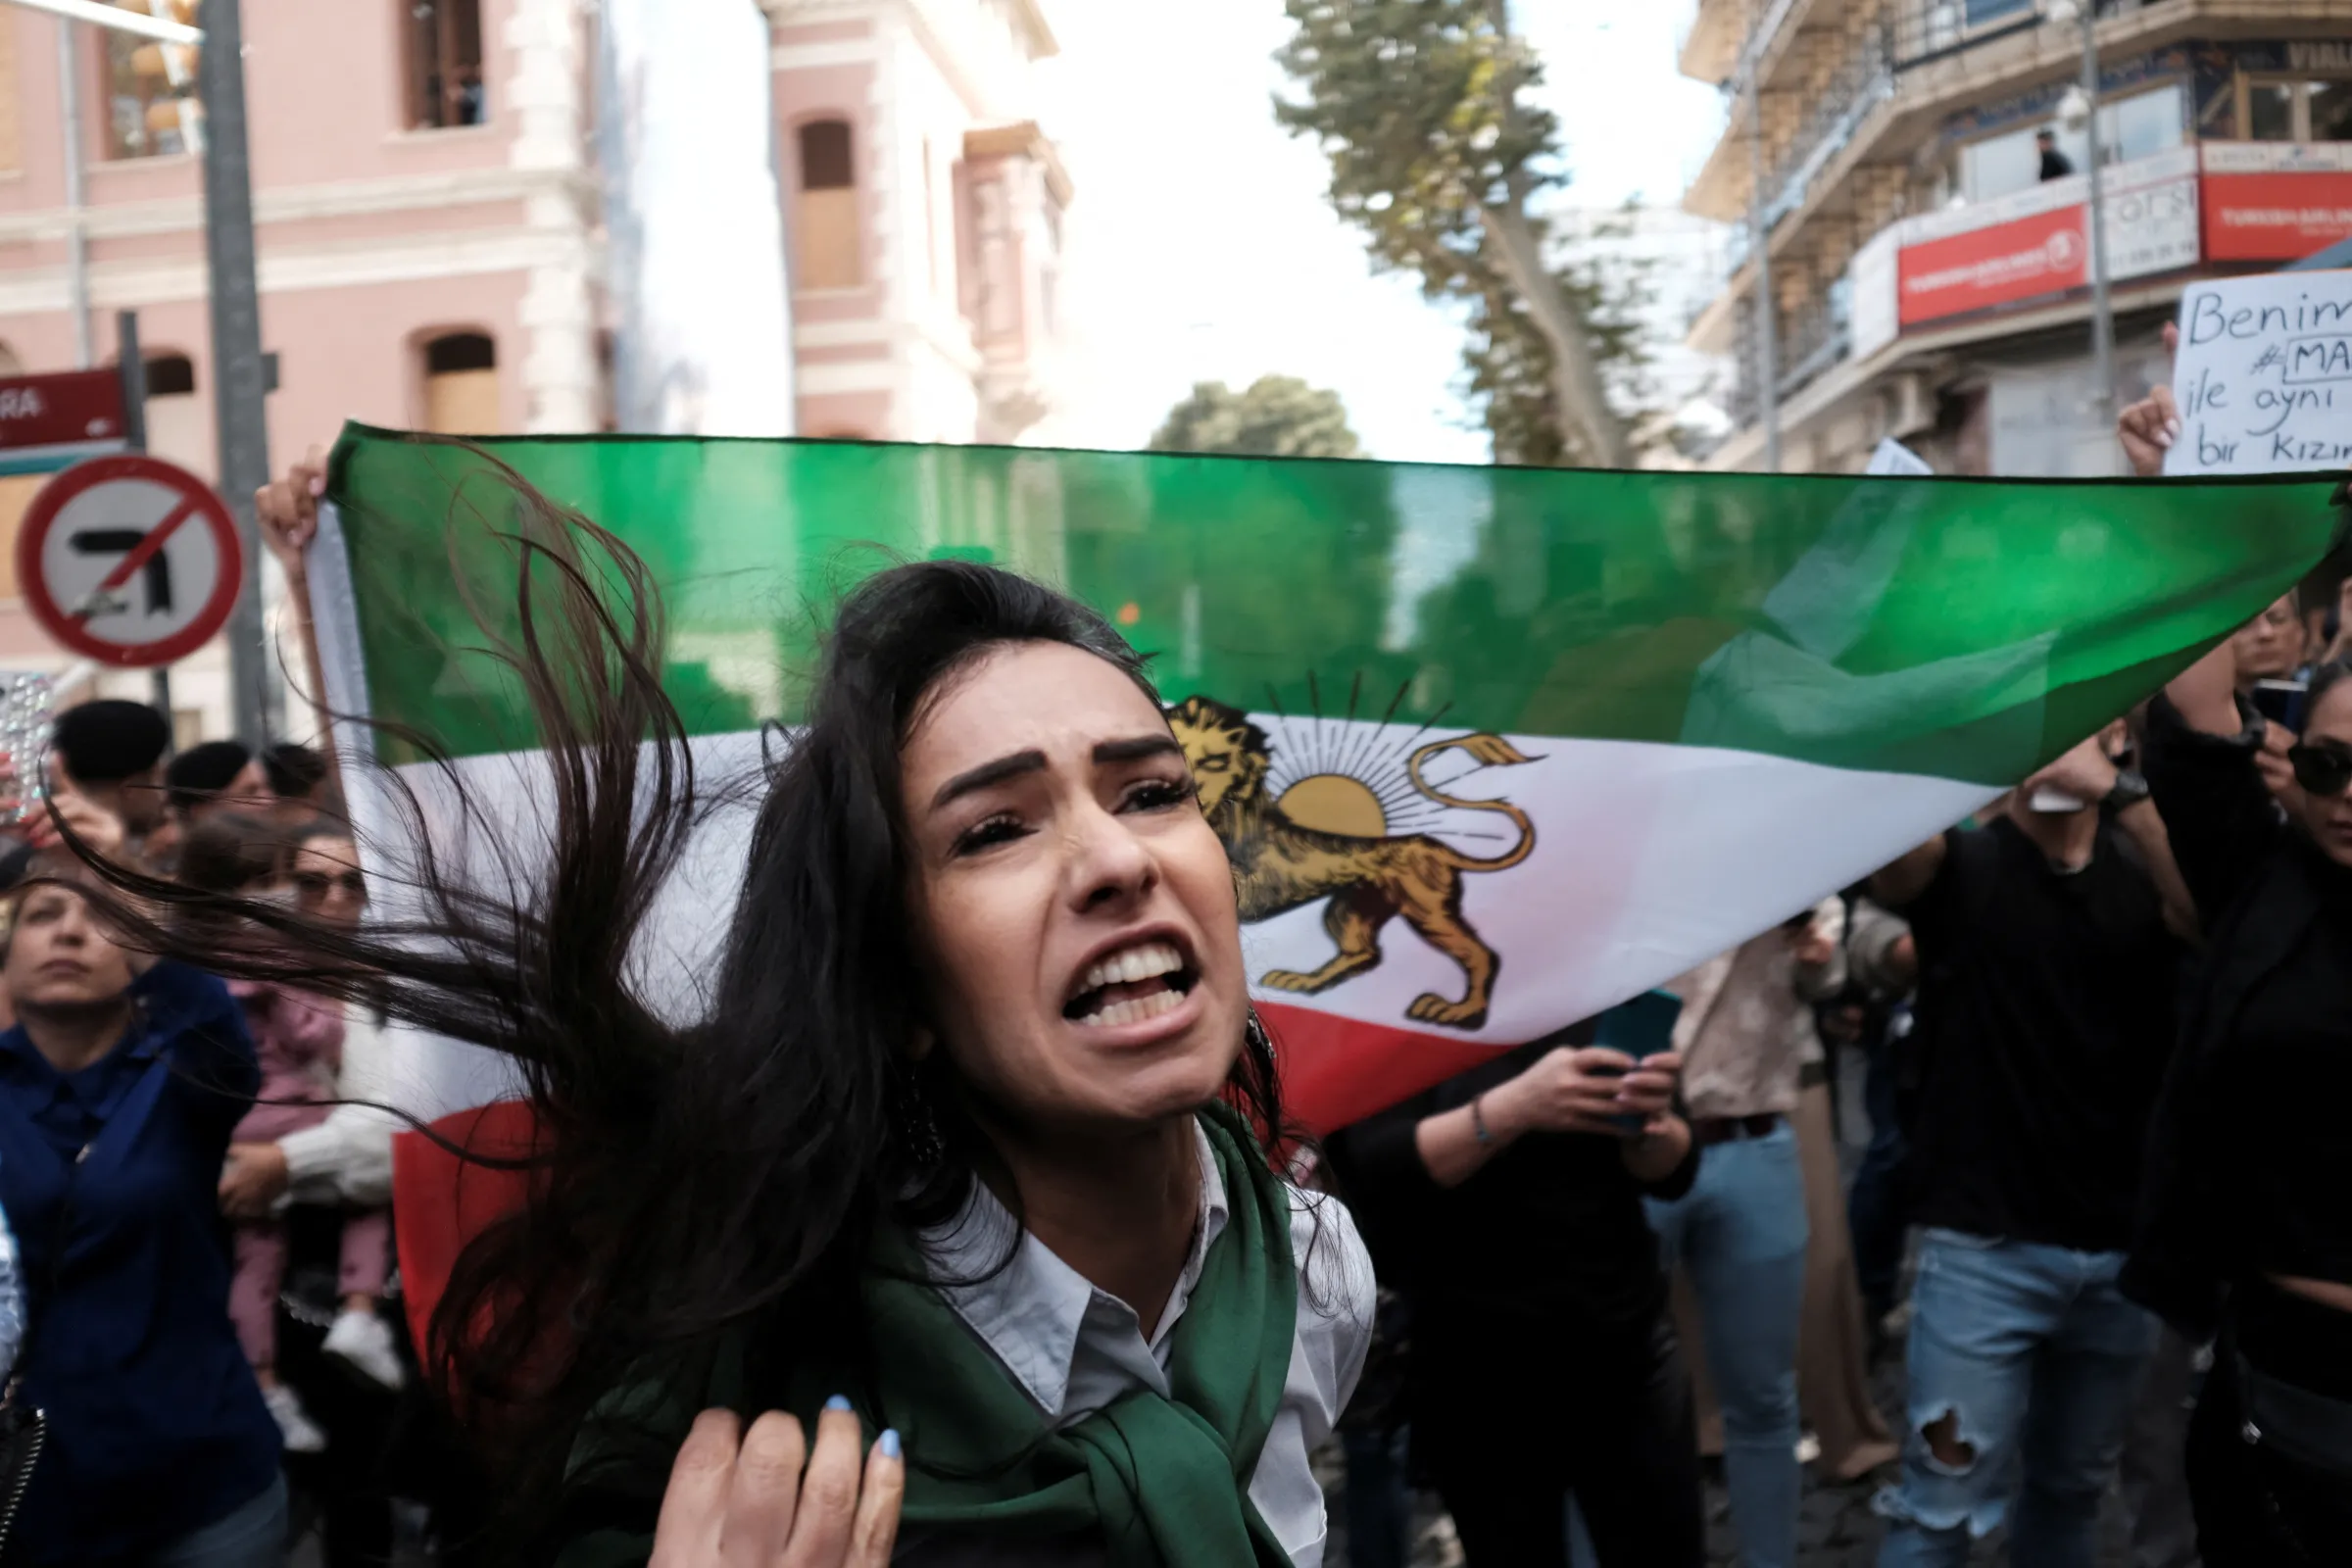 An Iranian woman living in Turkey reacts during a protest following the death of Mahsa Amini, outside the Iranian consulate in Istanbul, Turkey, September 21